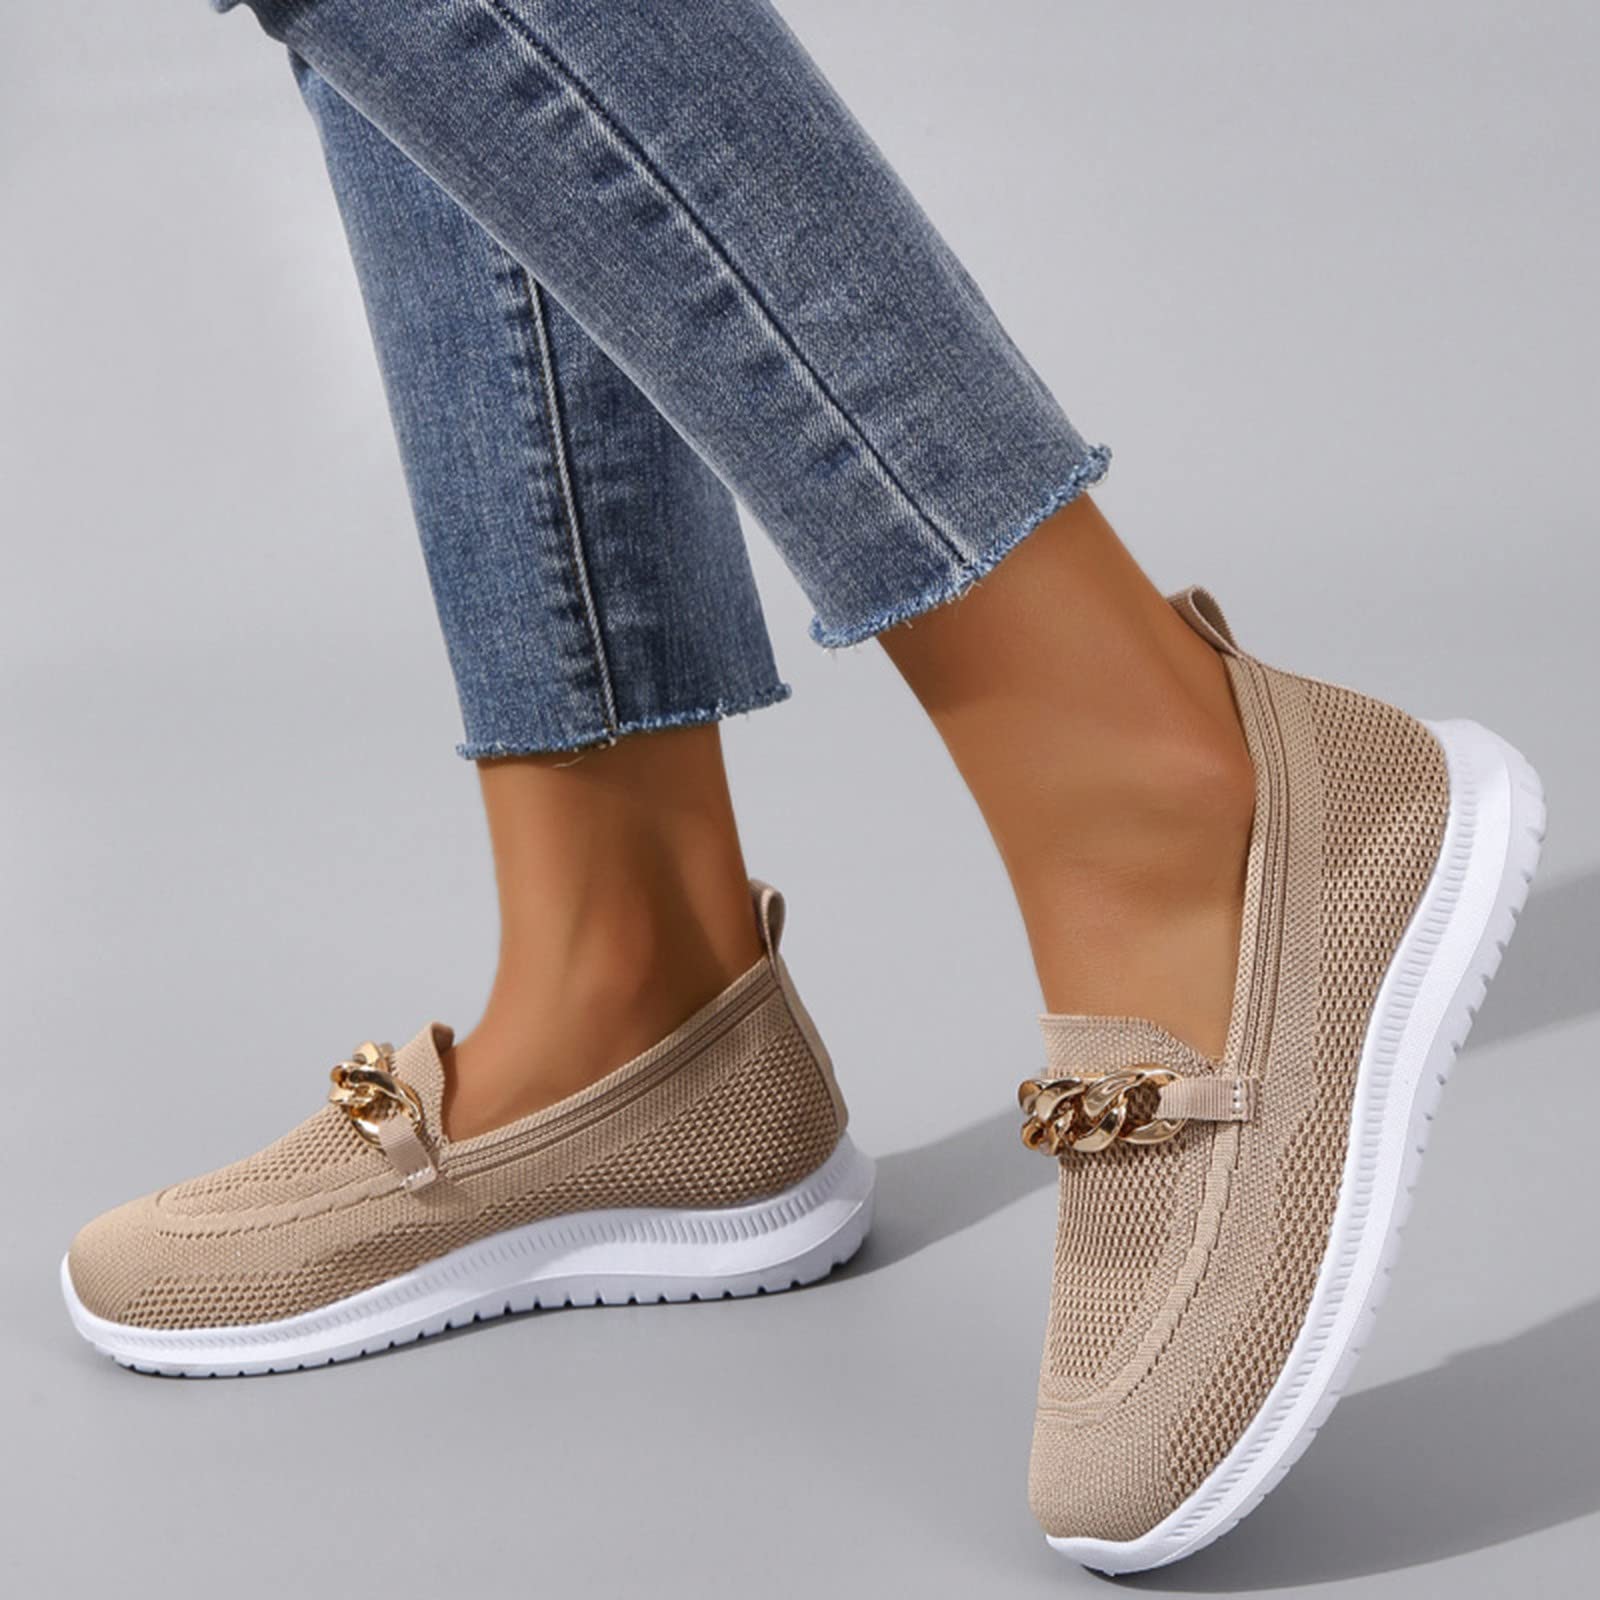 Hbeylia Platform Slip On Mesh Sneakers for Women Casual Breathable Mesh Air Cushion Metal Chain Design Trendy Chunky Bottom Low Top Canvas Shoes Flats Walking Shoes Play Sneakers Loafers Khaki